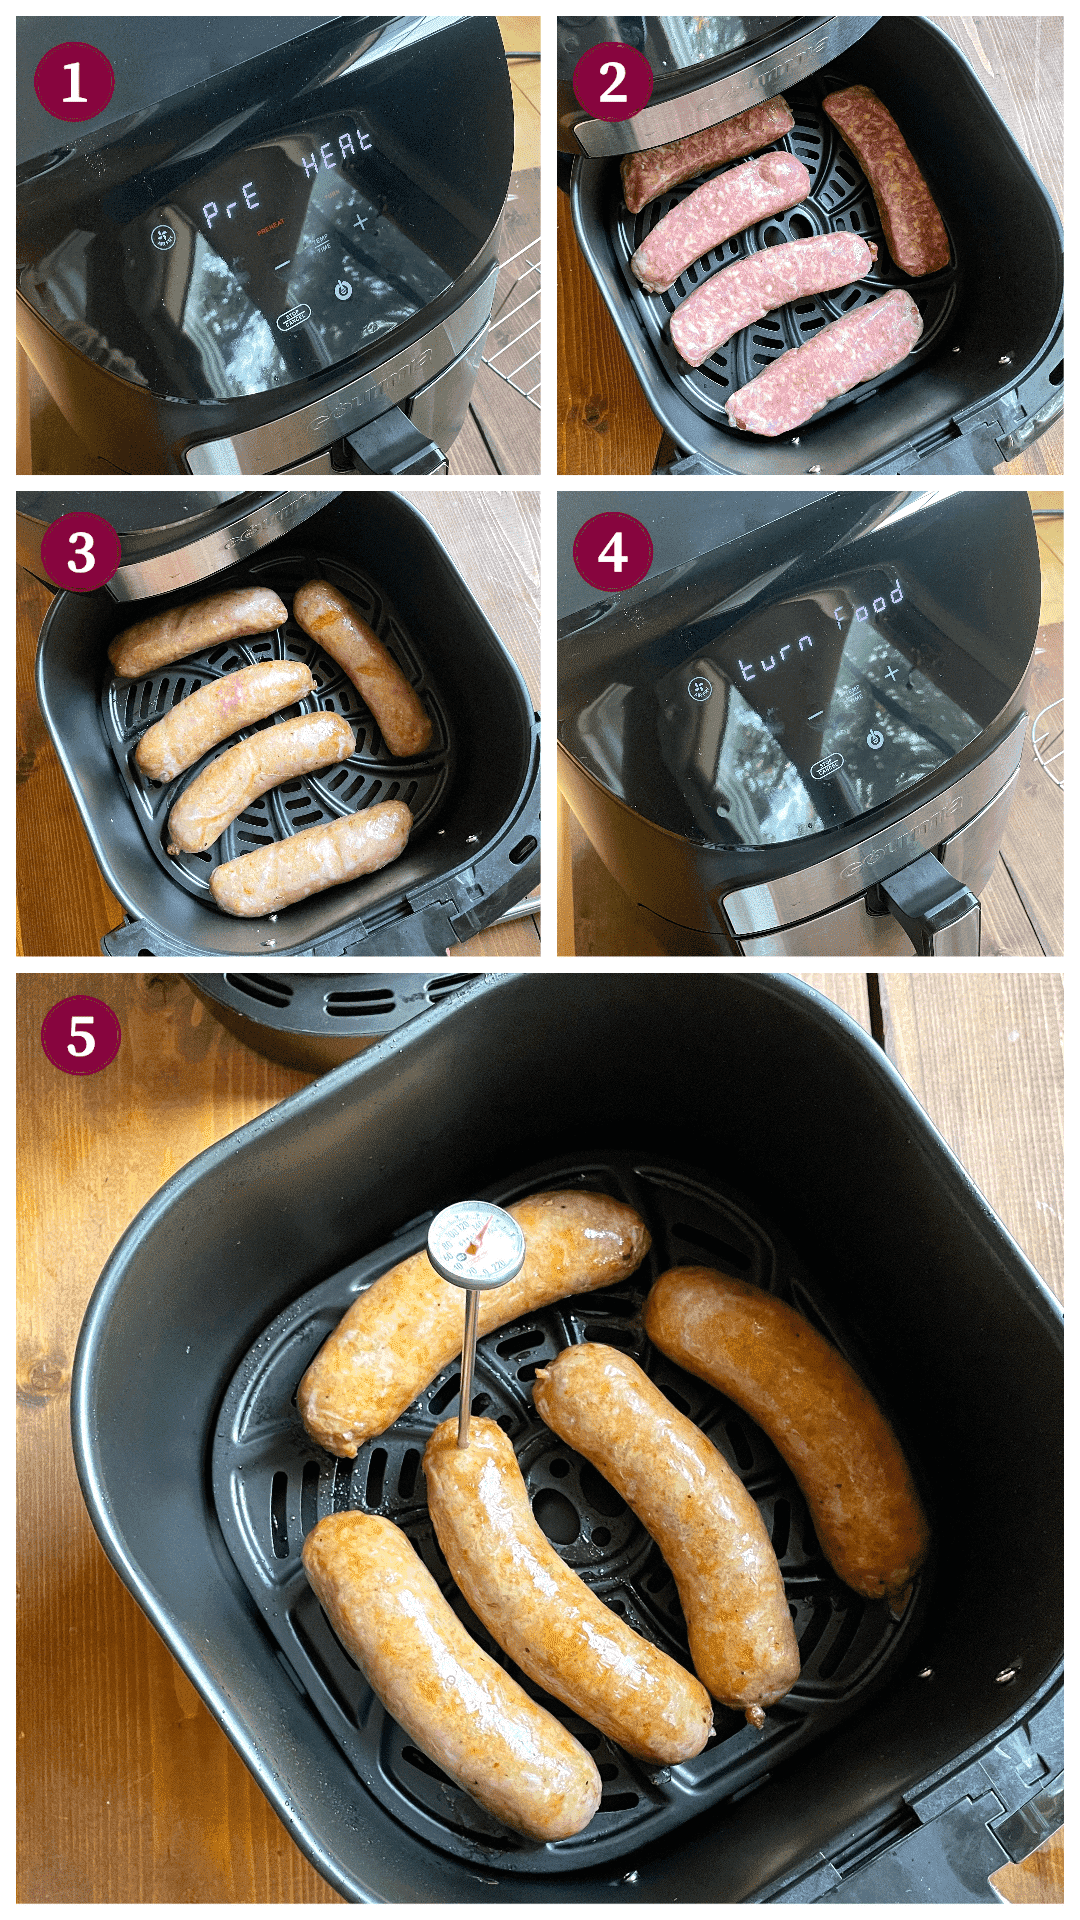 A collage of images showing how to air fry Italian sausage, steps 1-5.